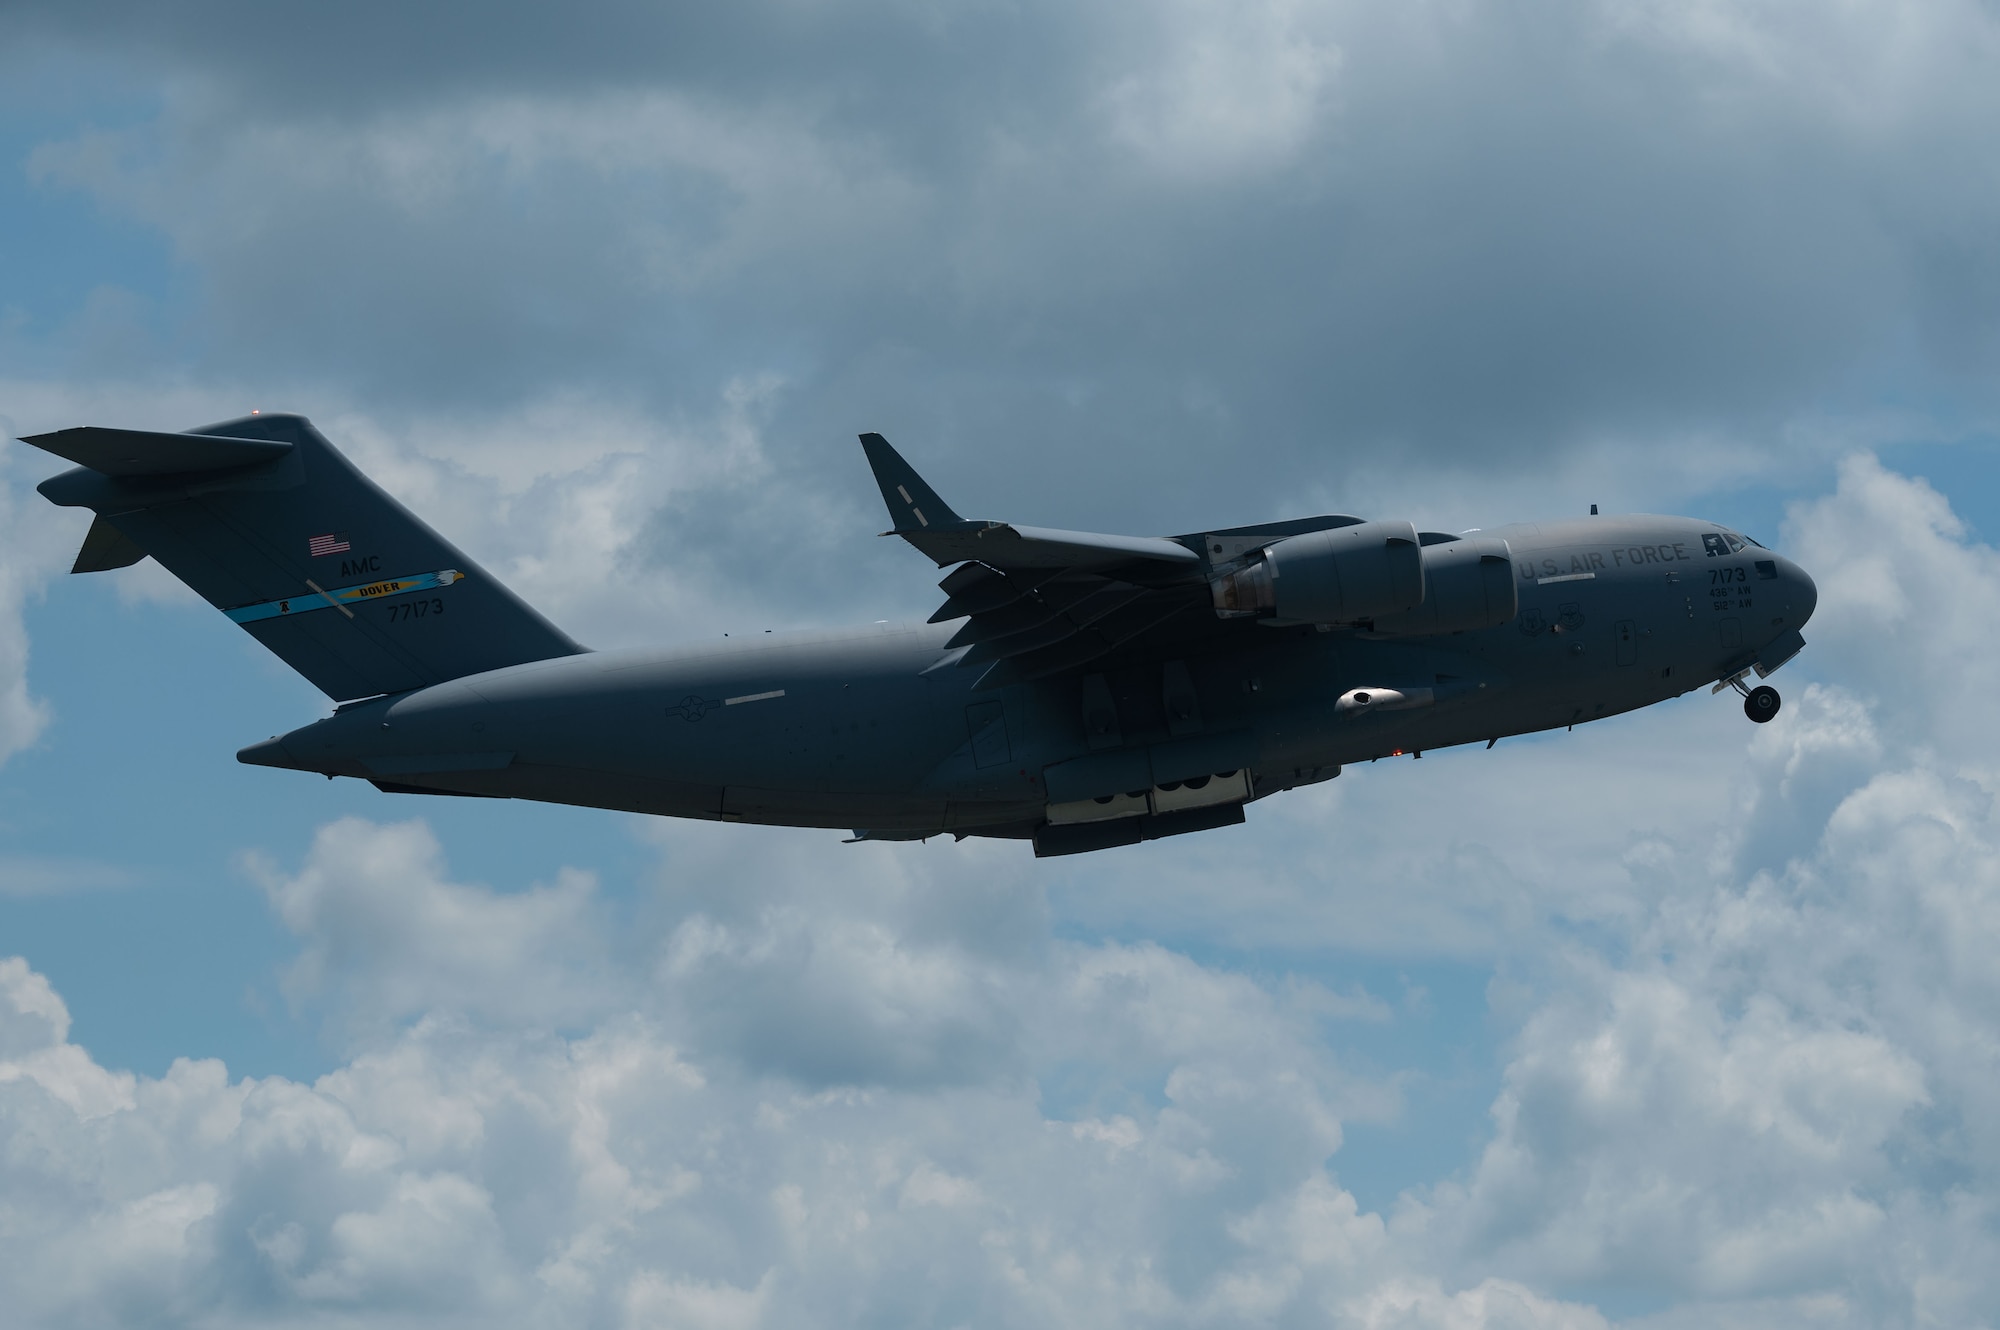 A C-17 Globemaster III assigned to the 436th Airlift Wing, Dover Air Force Base, Delaware, takes off from Seymour Johnson Air Force Base, North Carolina, in support of Razor Talon 2023 July 24, 2023. RT-23 is an agile combat employment focused exercise, designed to test the 4th Fighter Wing’s ability to operate as a lead wing to generate combat airpower while continuing to move, maneuver, sustain the wing and subordinate force elements in a dynamic contested environment. (U.S. Air Force photo by Airman 1st Class Rebecca Sirimarco-Lang)